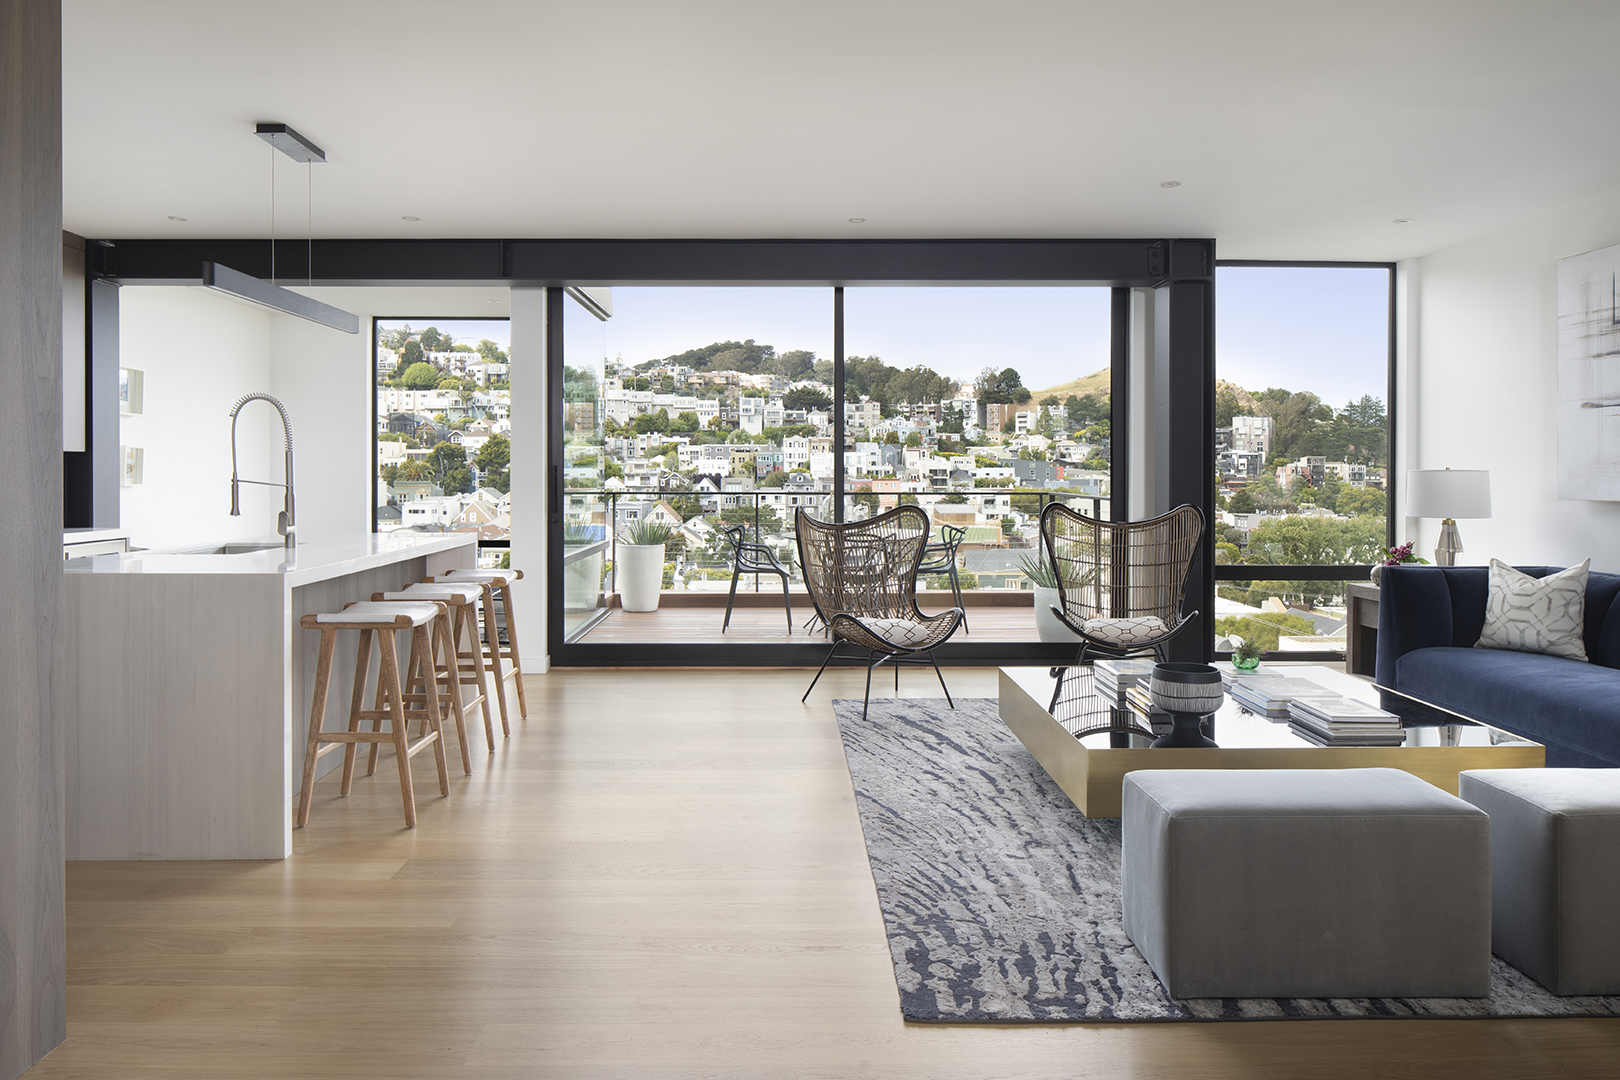 19th Street House in San Francisco, CA by John Lum Architecture